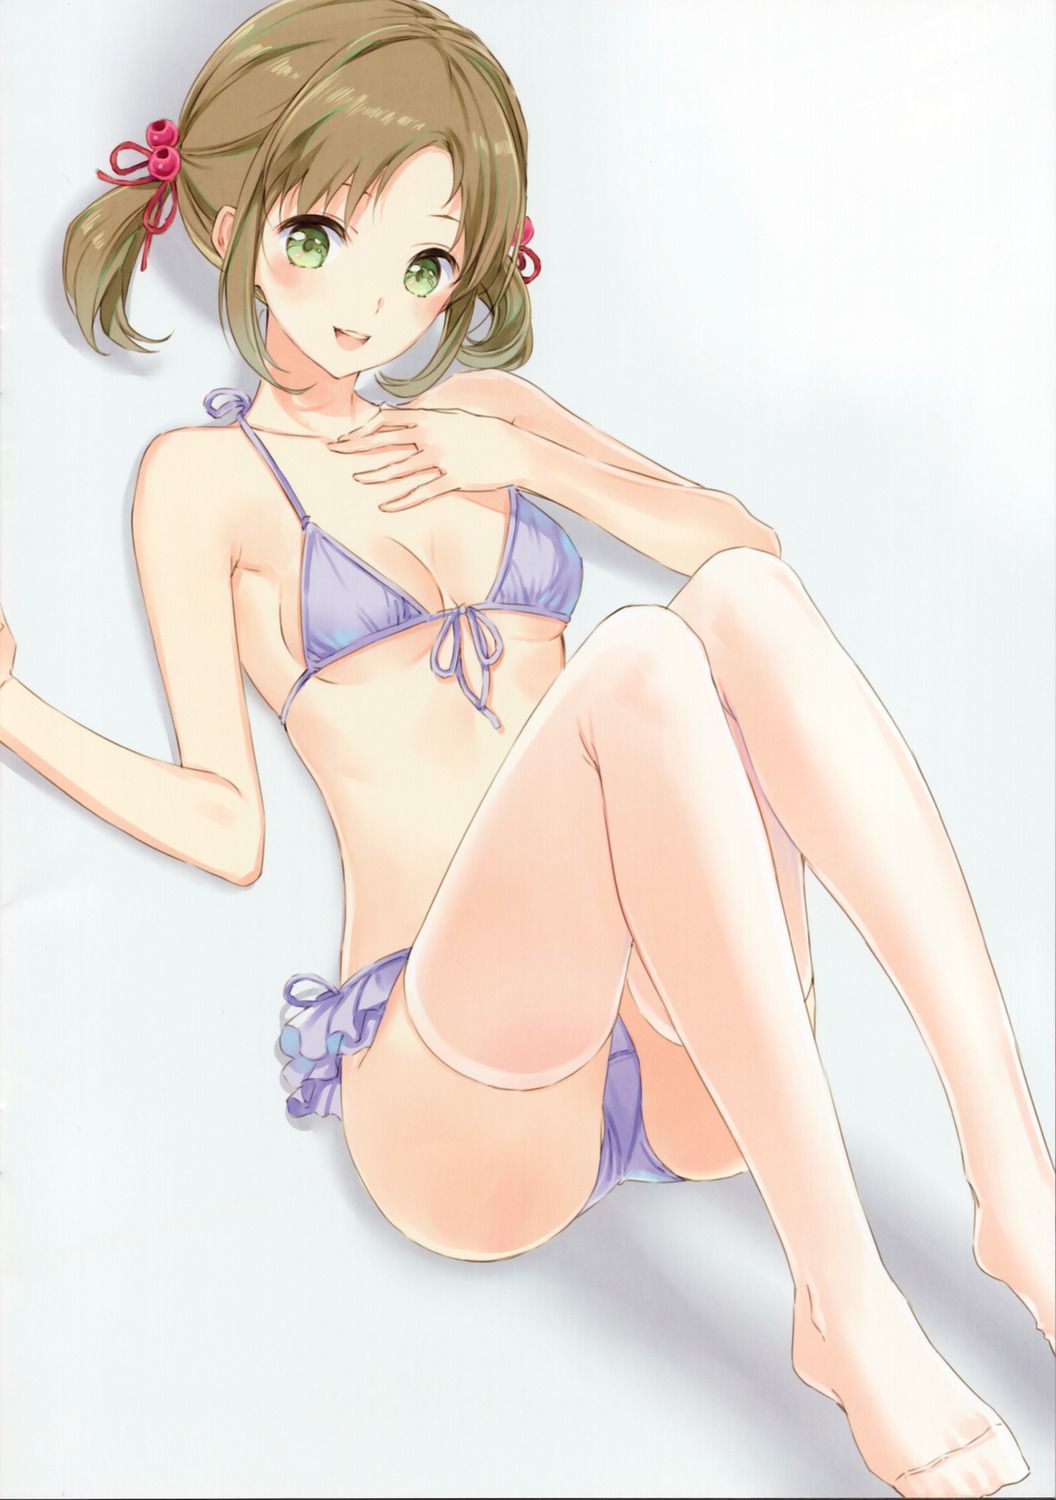 Succulent a swimsuit! Anime girl hentai picture 1 14